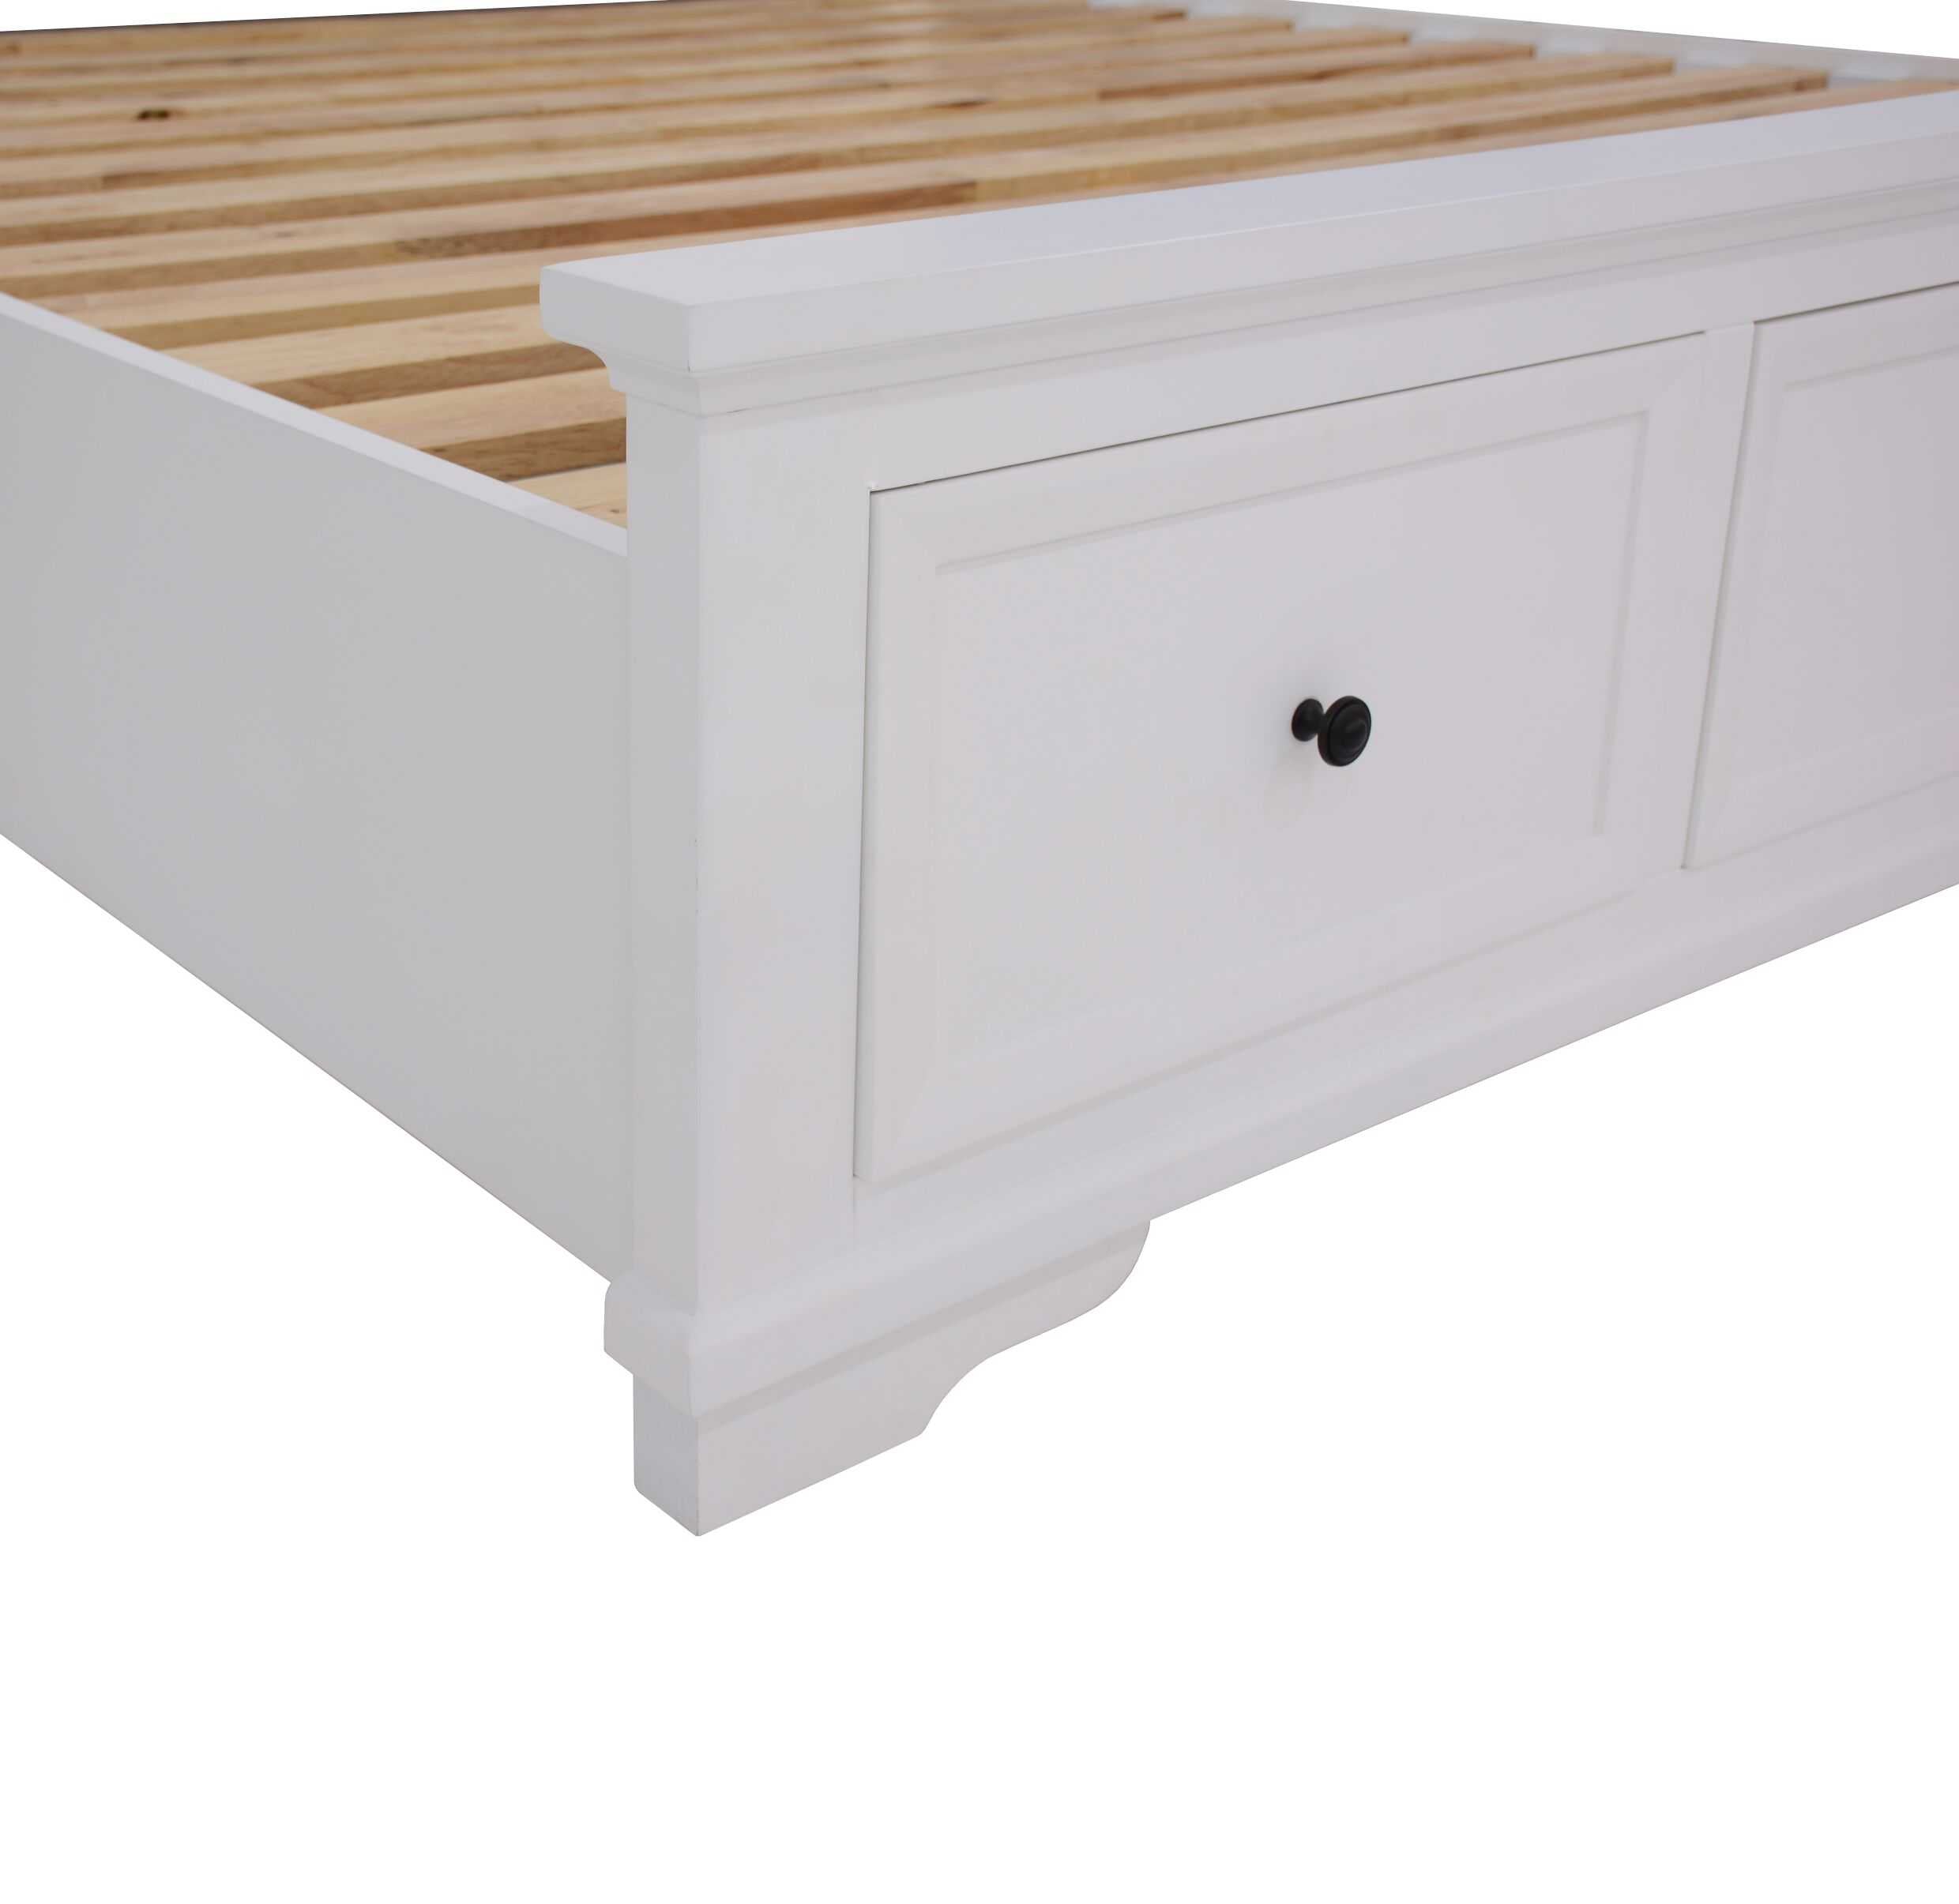 VI Venti Acacia (Pine) and MDF Timber Queen Bed with Storage White Finish